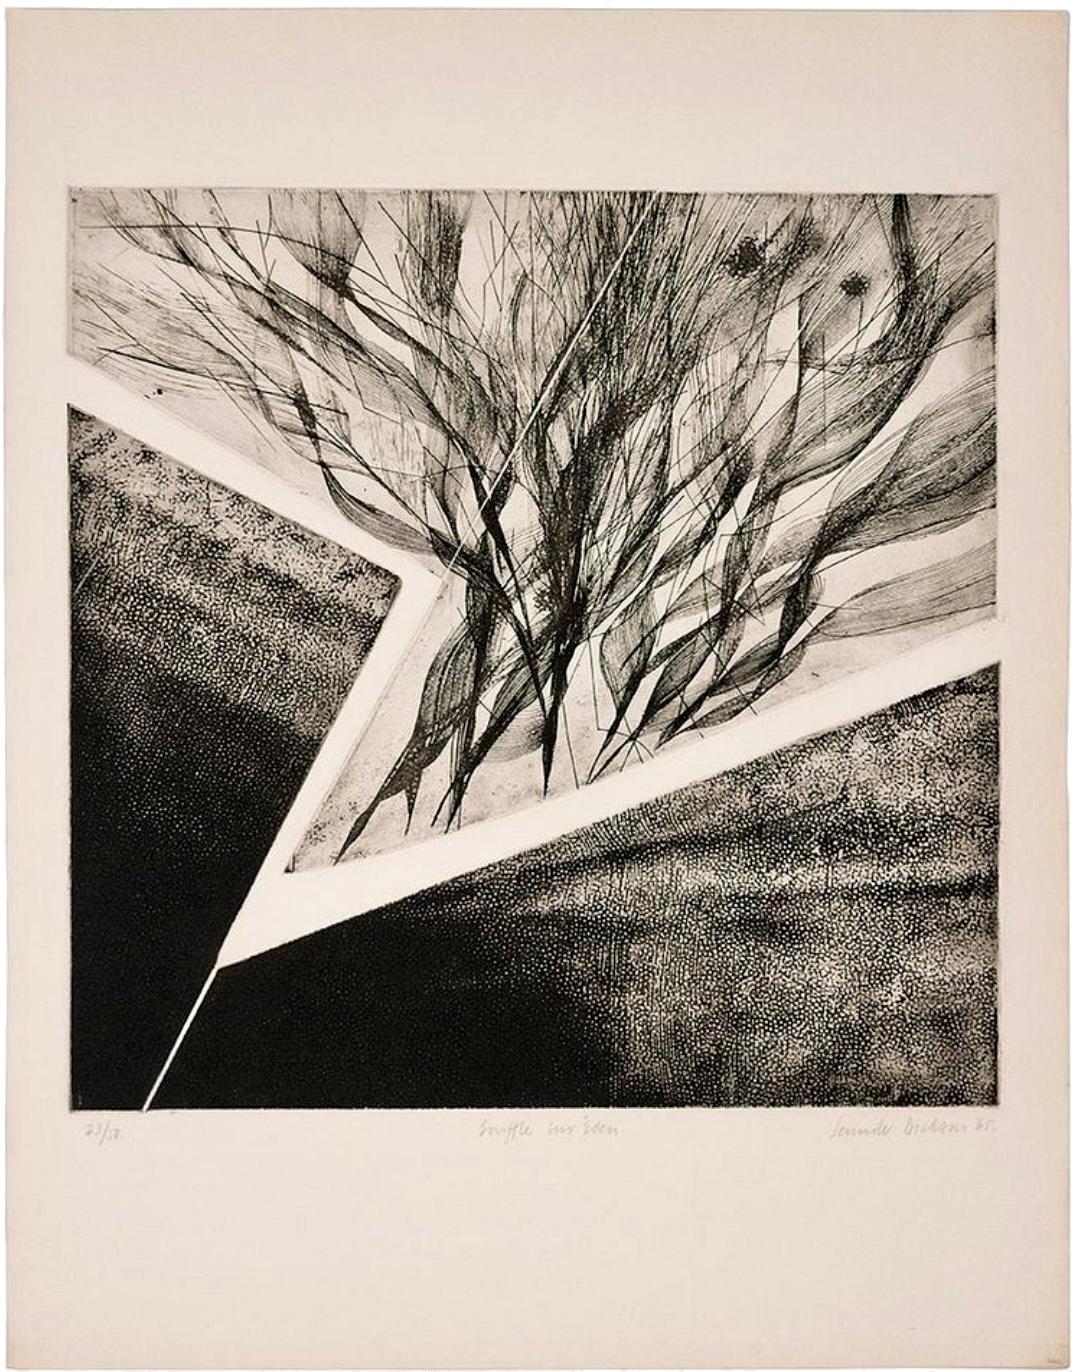 Etching with relief. Canadian artist. Hauntingly beautiful and meticulous hand-tinted etching. Jennifer Dickson’s work has been exhibited internationally as well as reproduced in publications by the Porcupine’s Quill Press, and McClelland & Stewart.